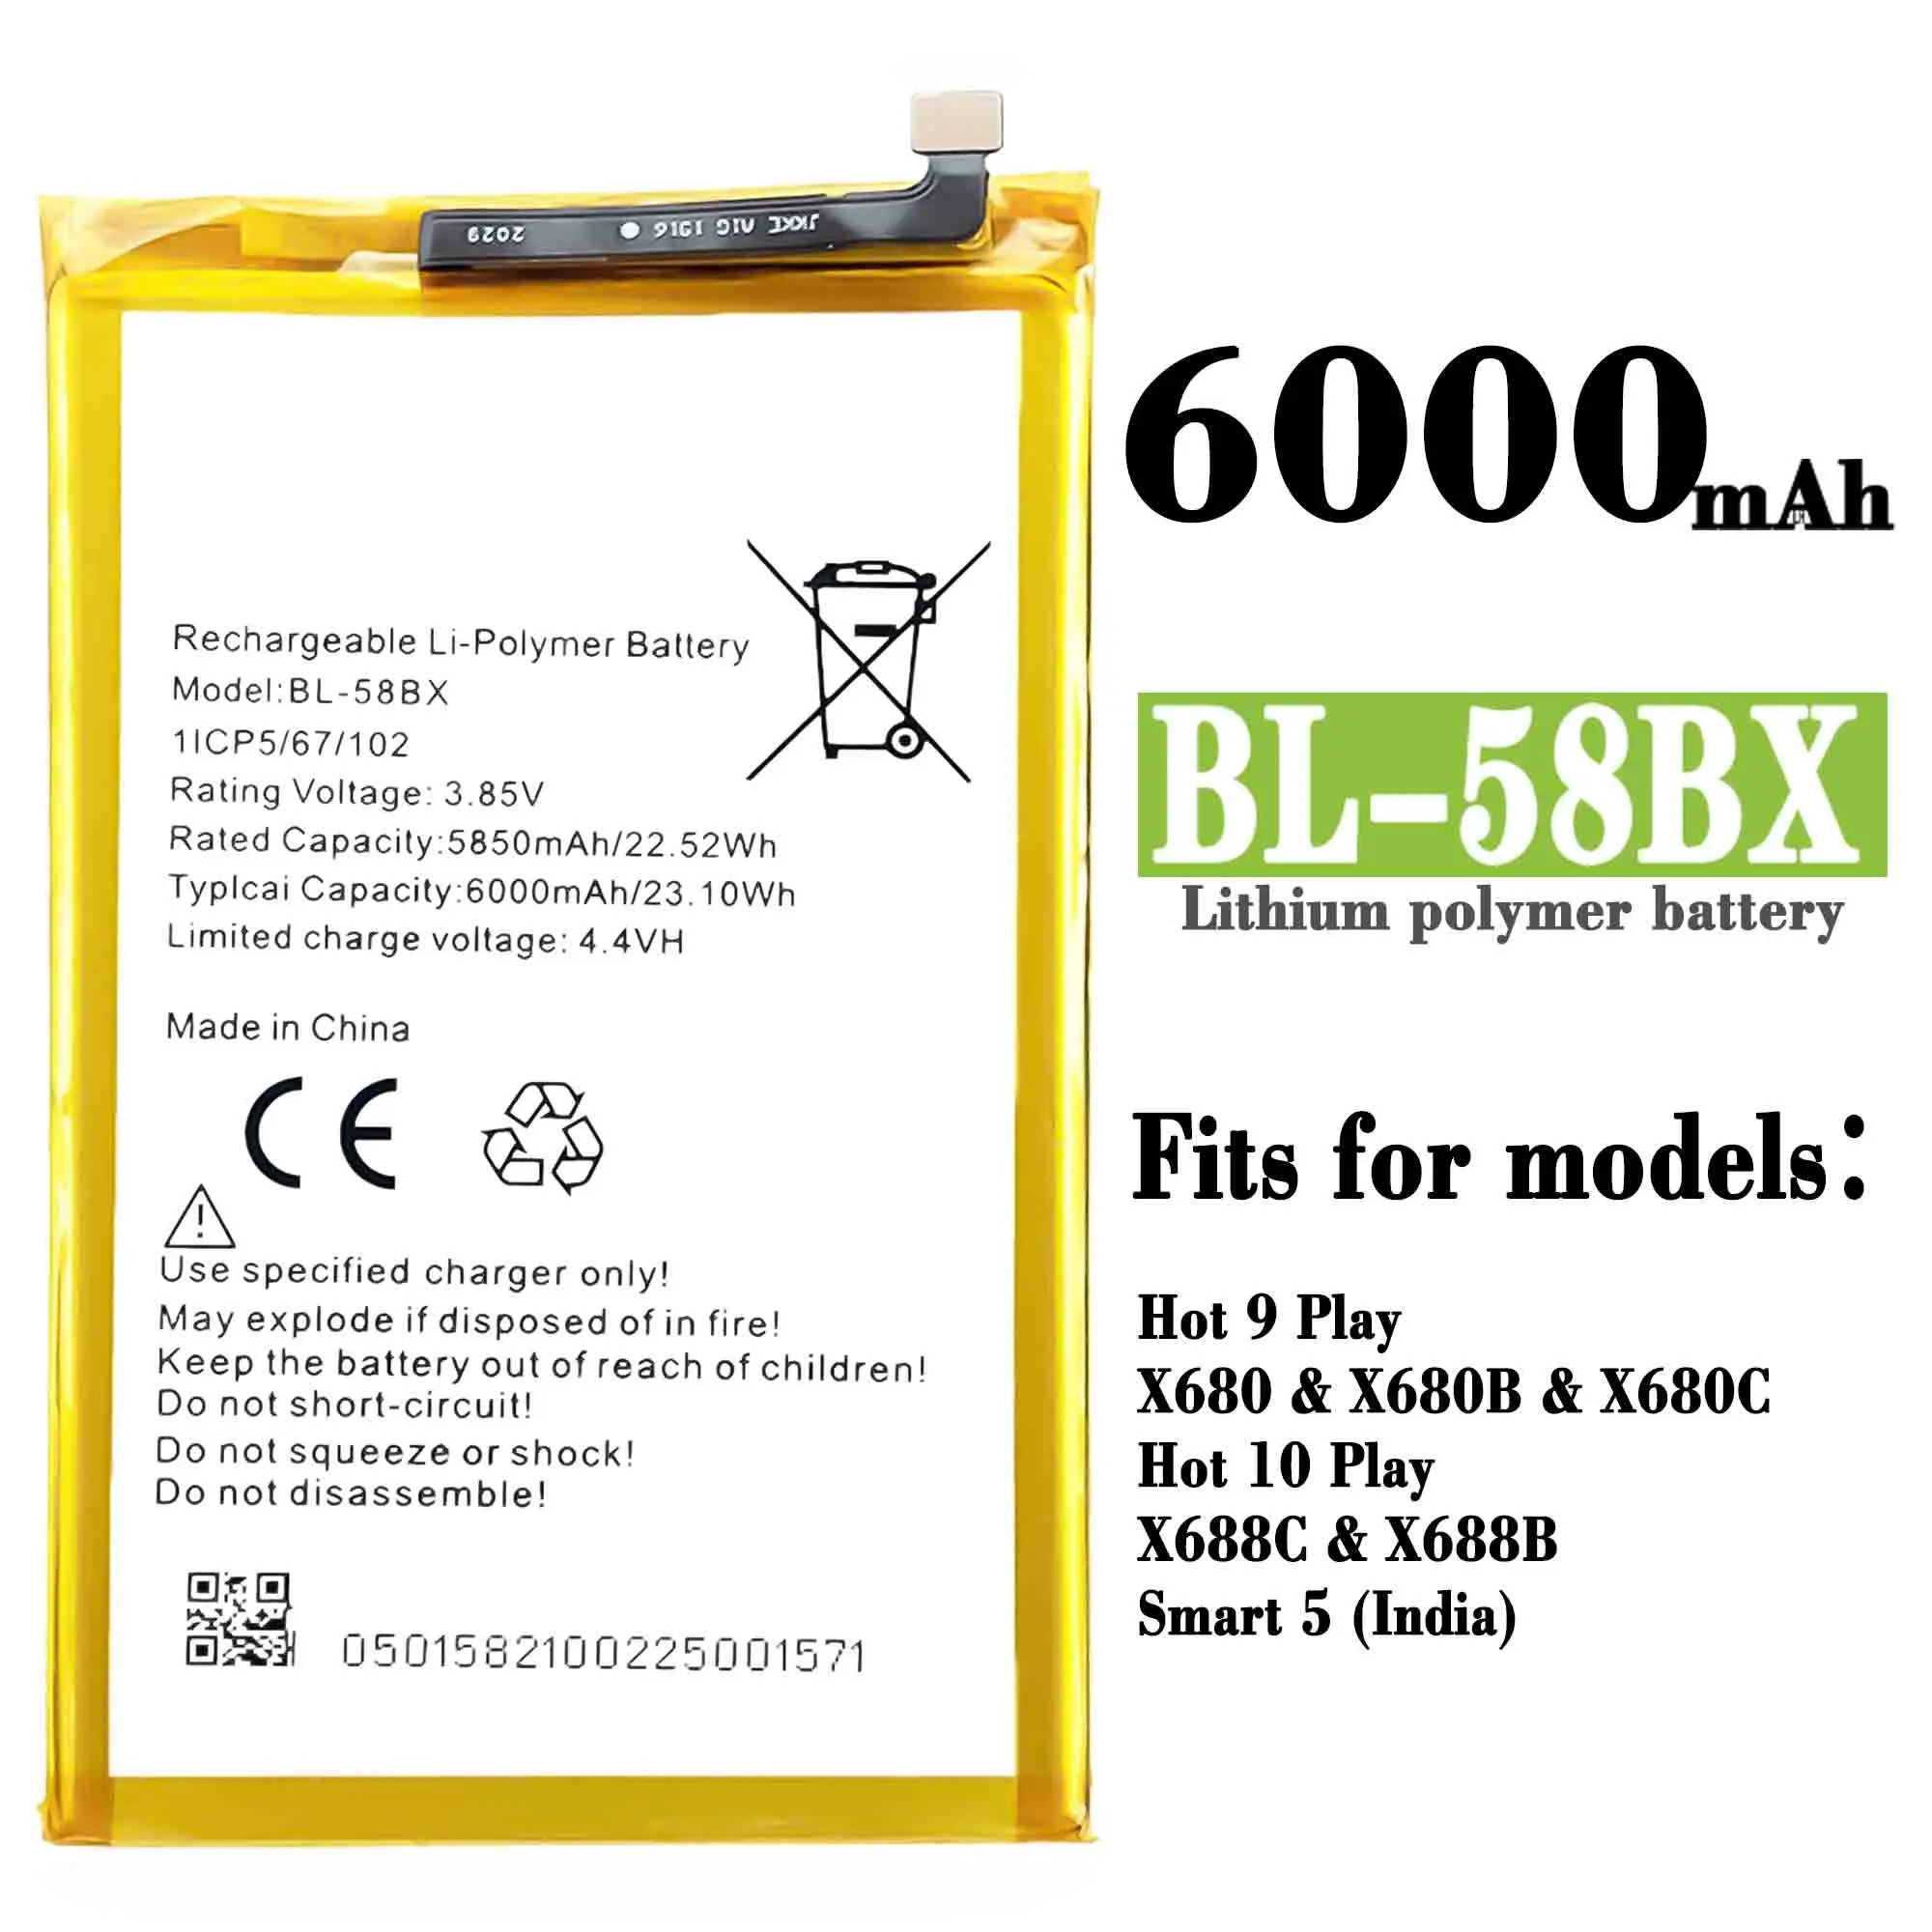 Compatible For  infinix / X680/Hot 9 Play/Hot 10 Play/X688B/X688C/Smart 5 India BL-58BX 6000mAh Phone Battery Series enlarge